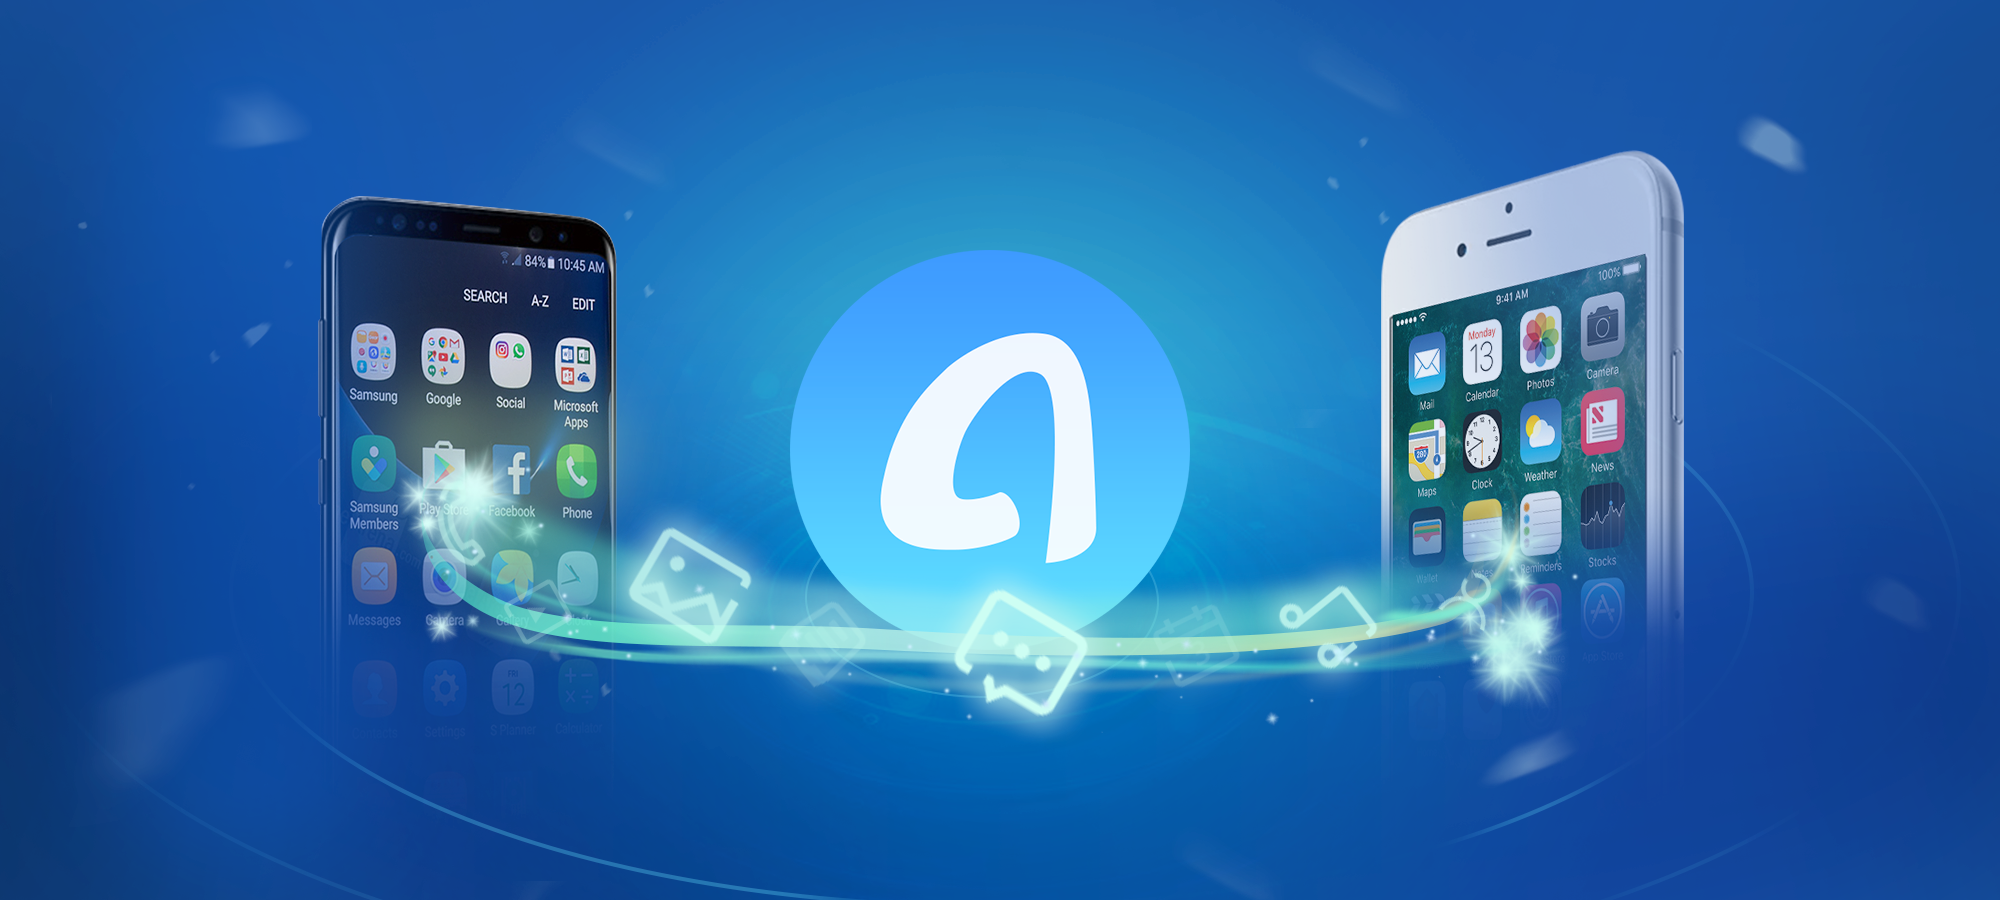 instal the new version for ios AnyTrans iOS 8.9.5.20230727